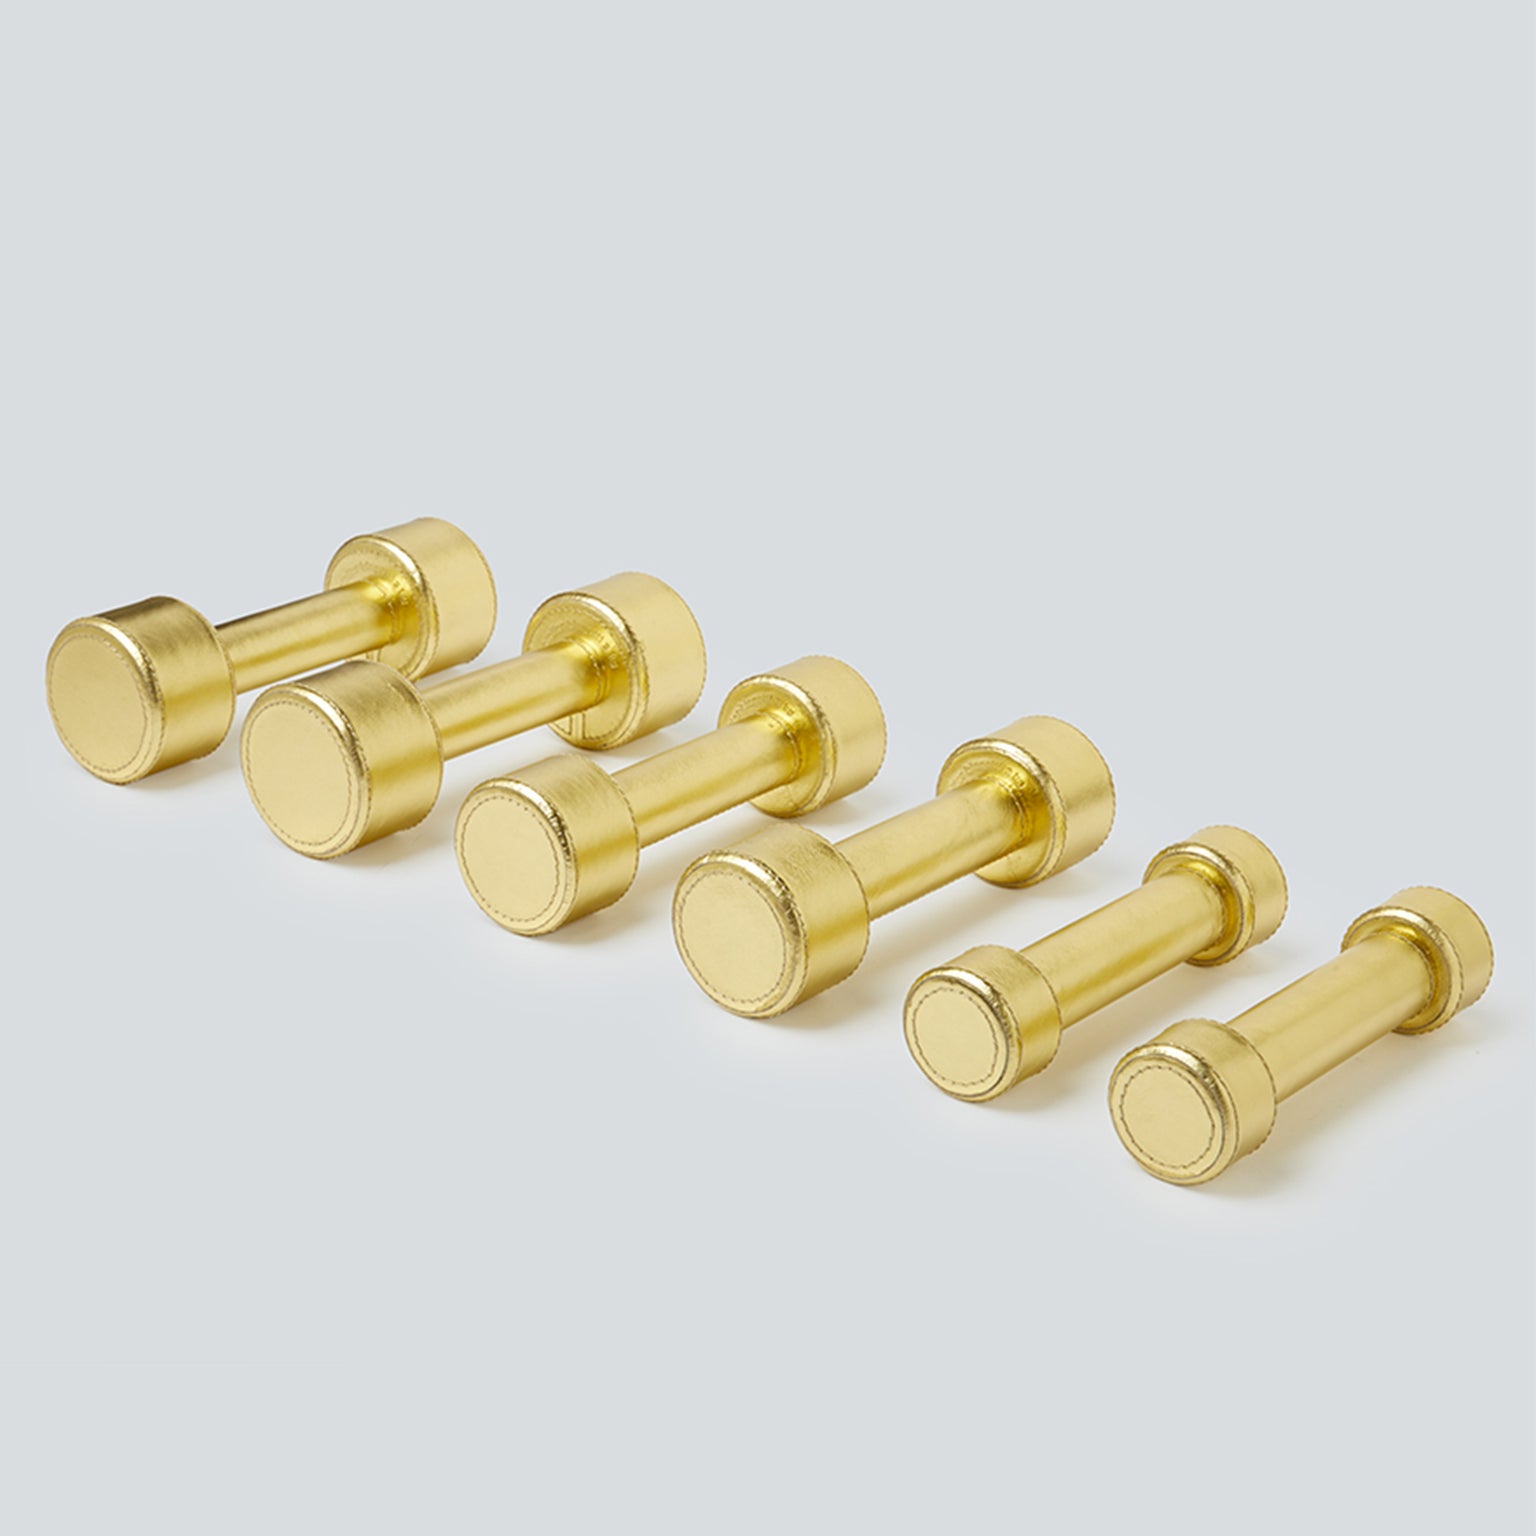 Dumbbell Set in Stainless Steel Covered in Gold Leather, Atelier Biagetti